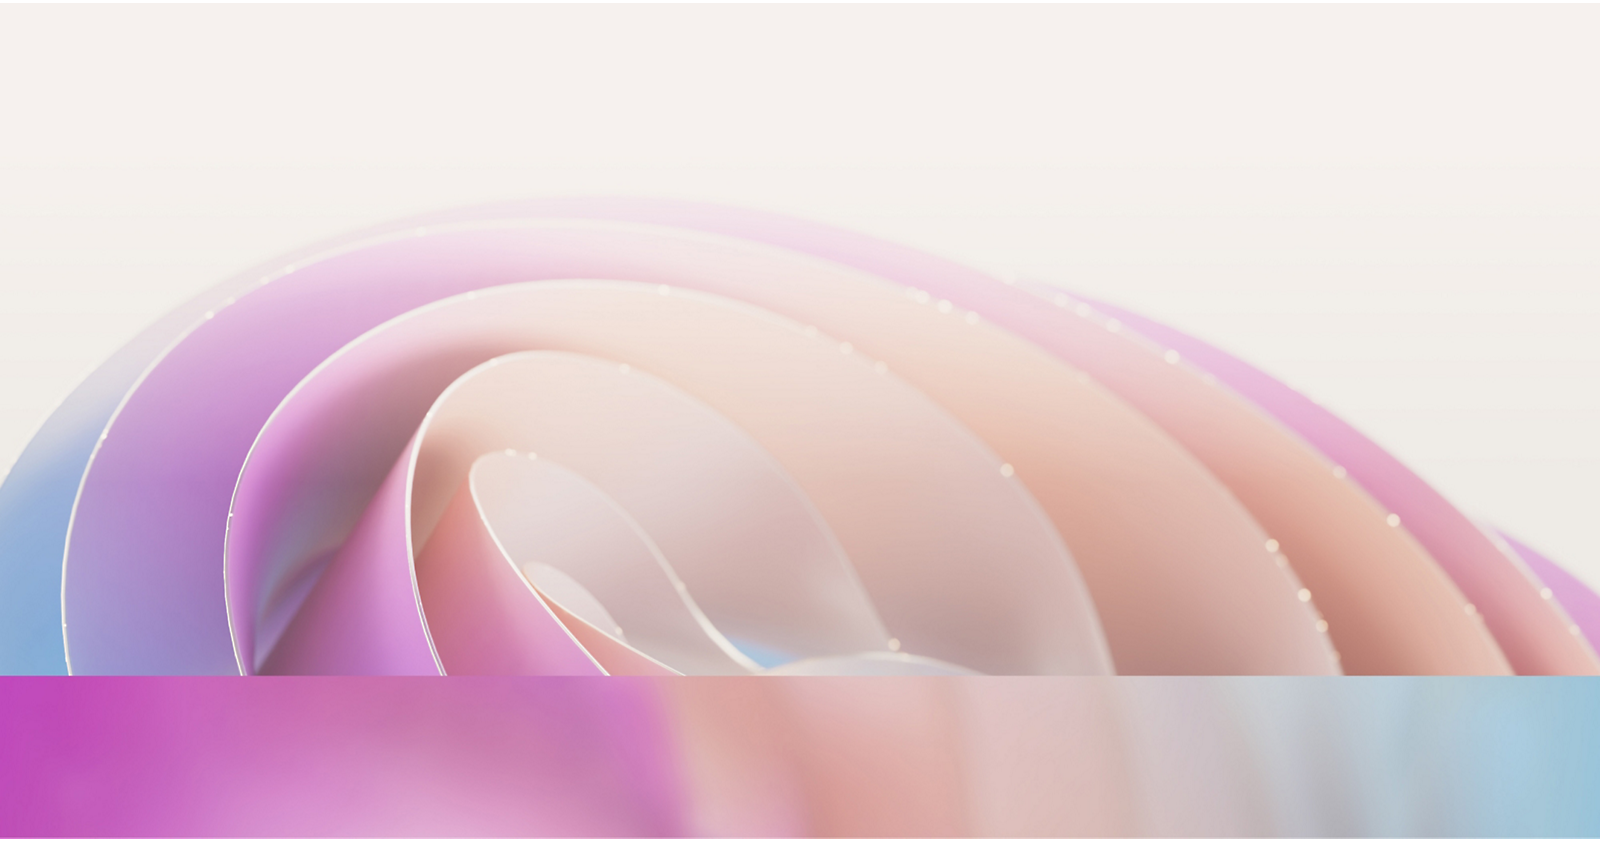 Abstract image showing soft, overlapping colorful curves in pastel shades of pink, purple, and blue 